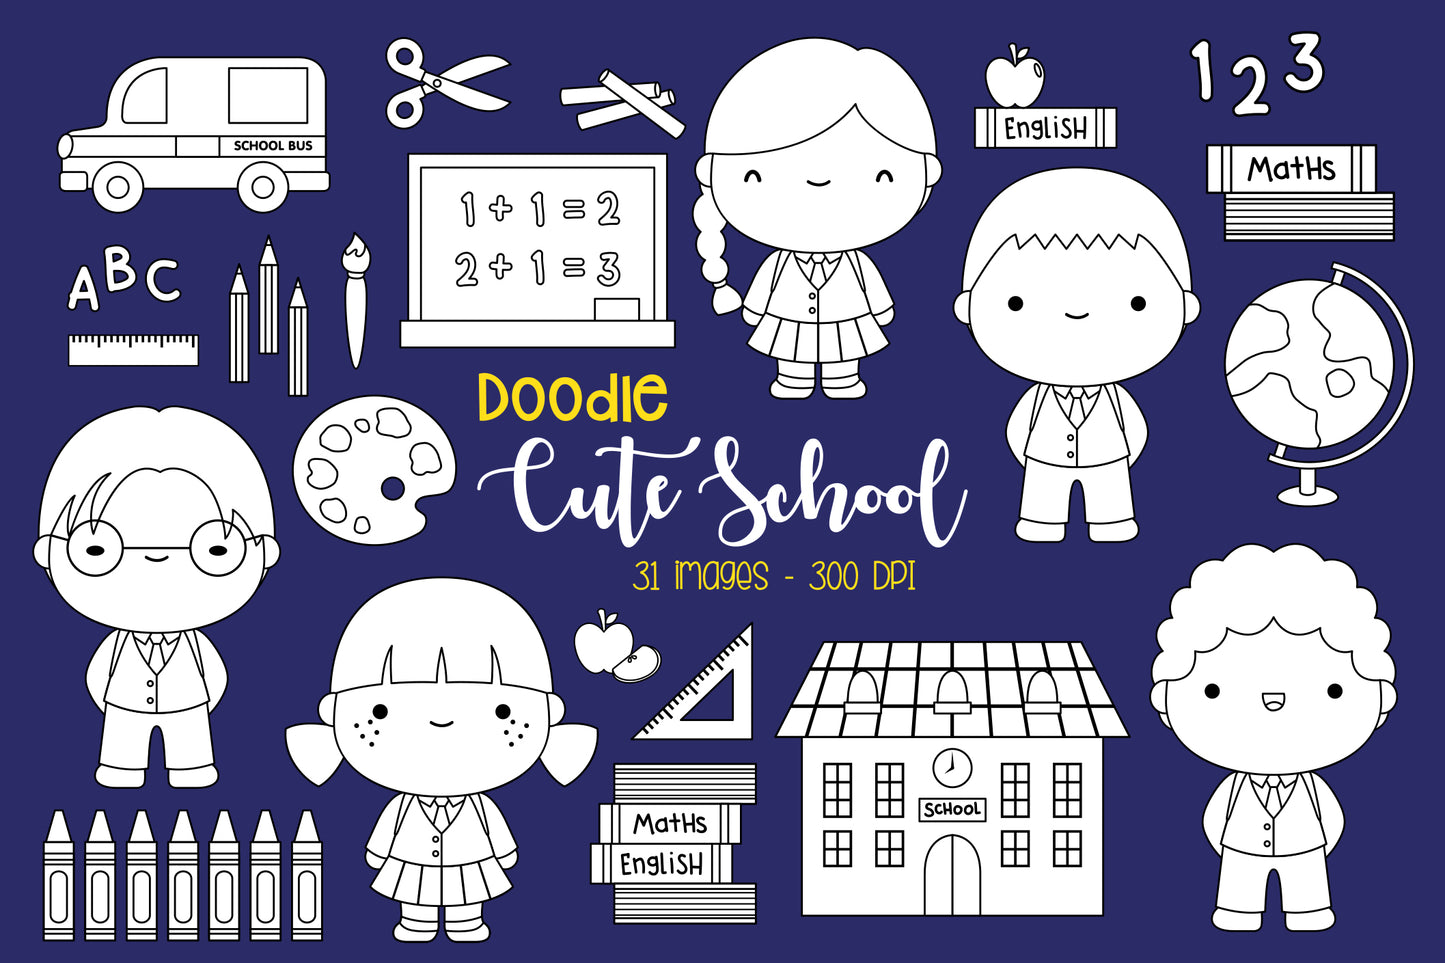 Doodle Cute School Kids and Items Coloring